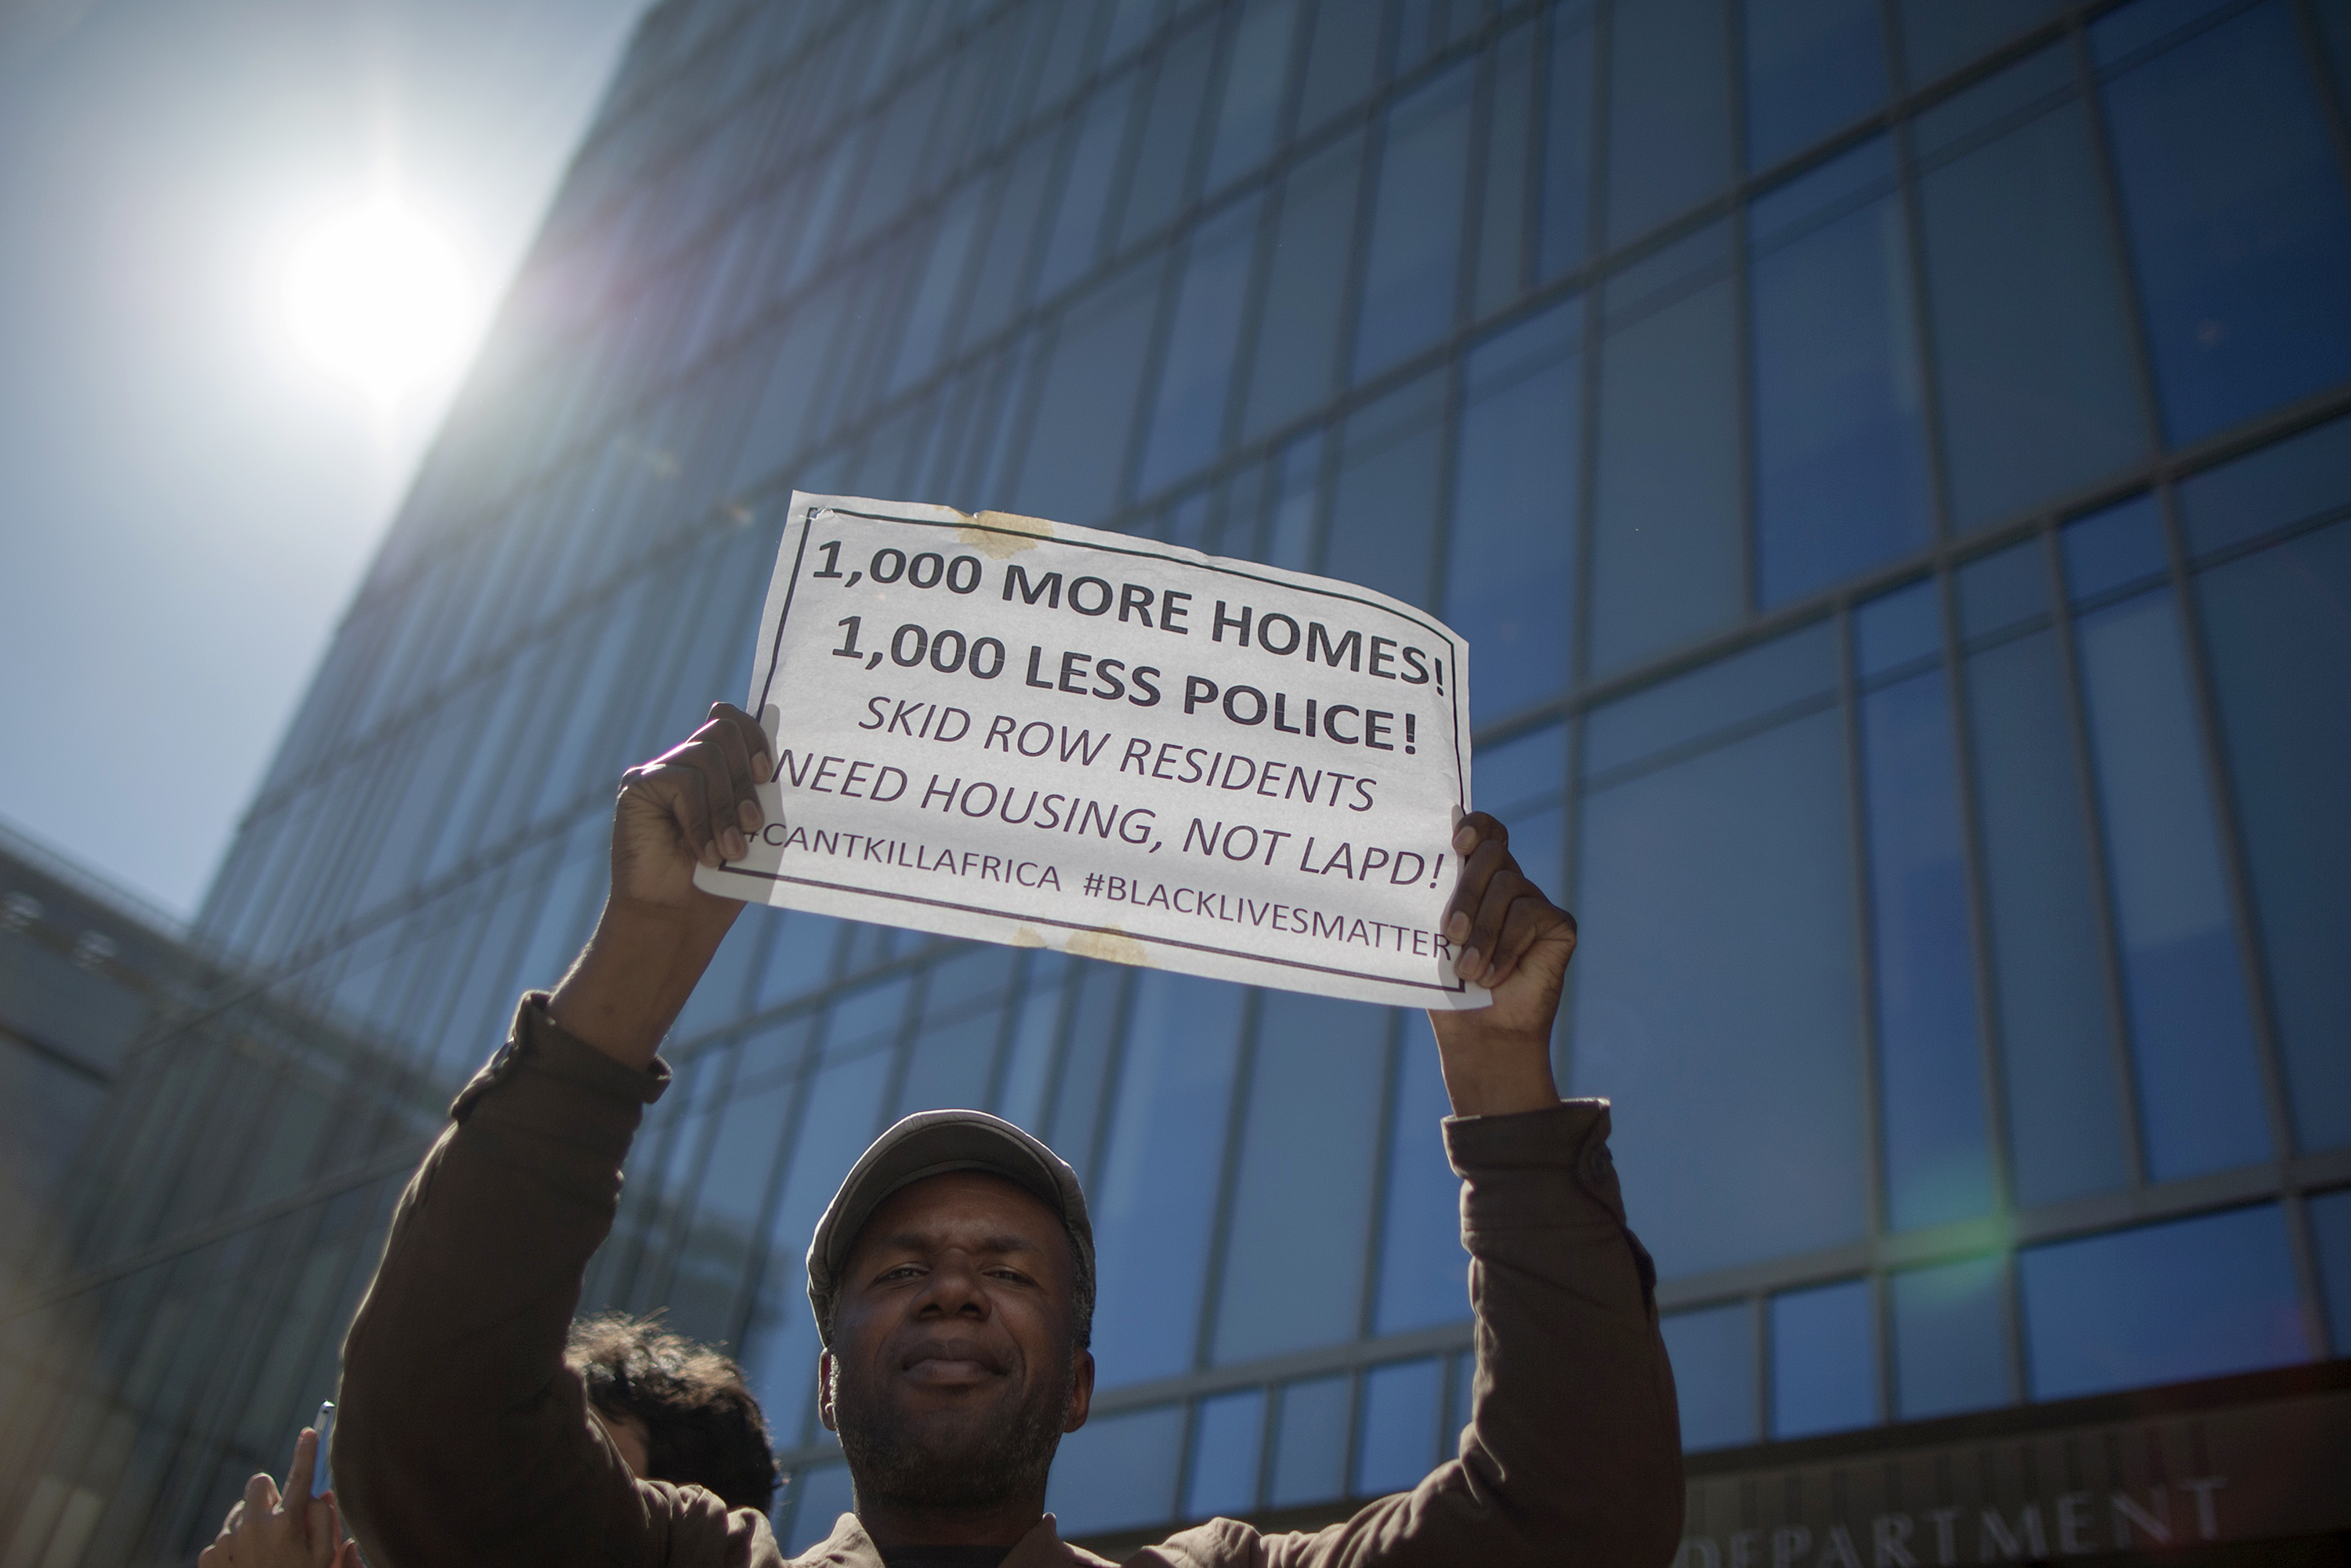 A protester standing in front of a glass skyscraper is holding a sign that says “1,000 more homes, 1,000 less police.”